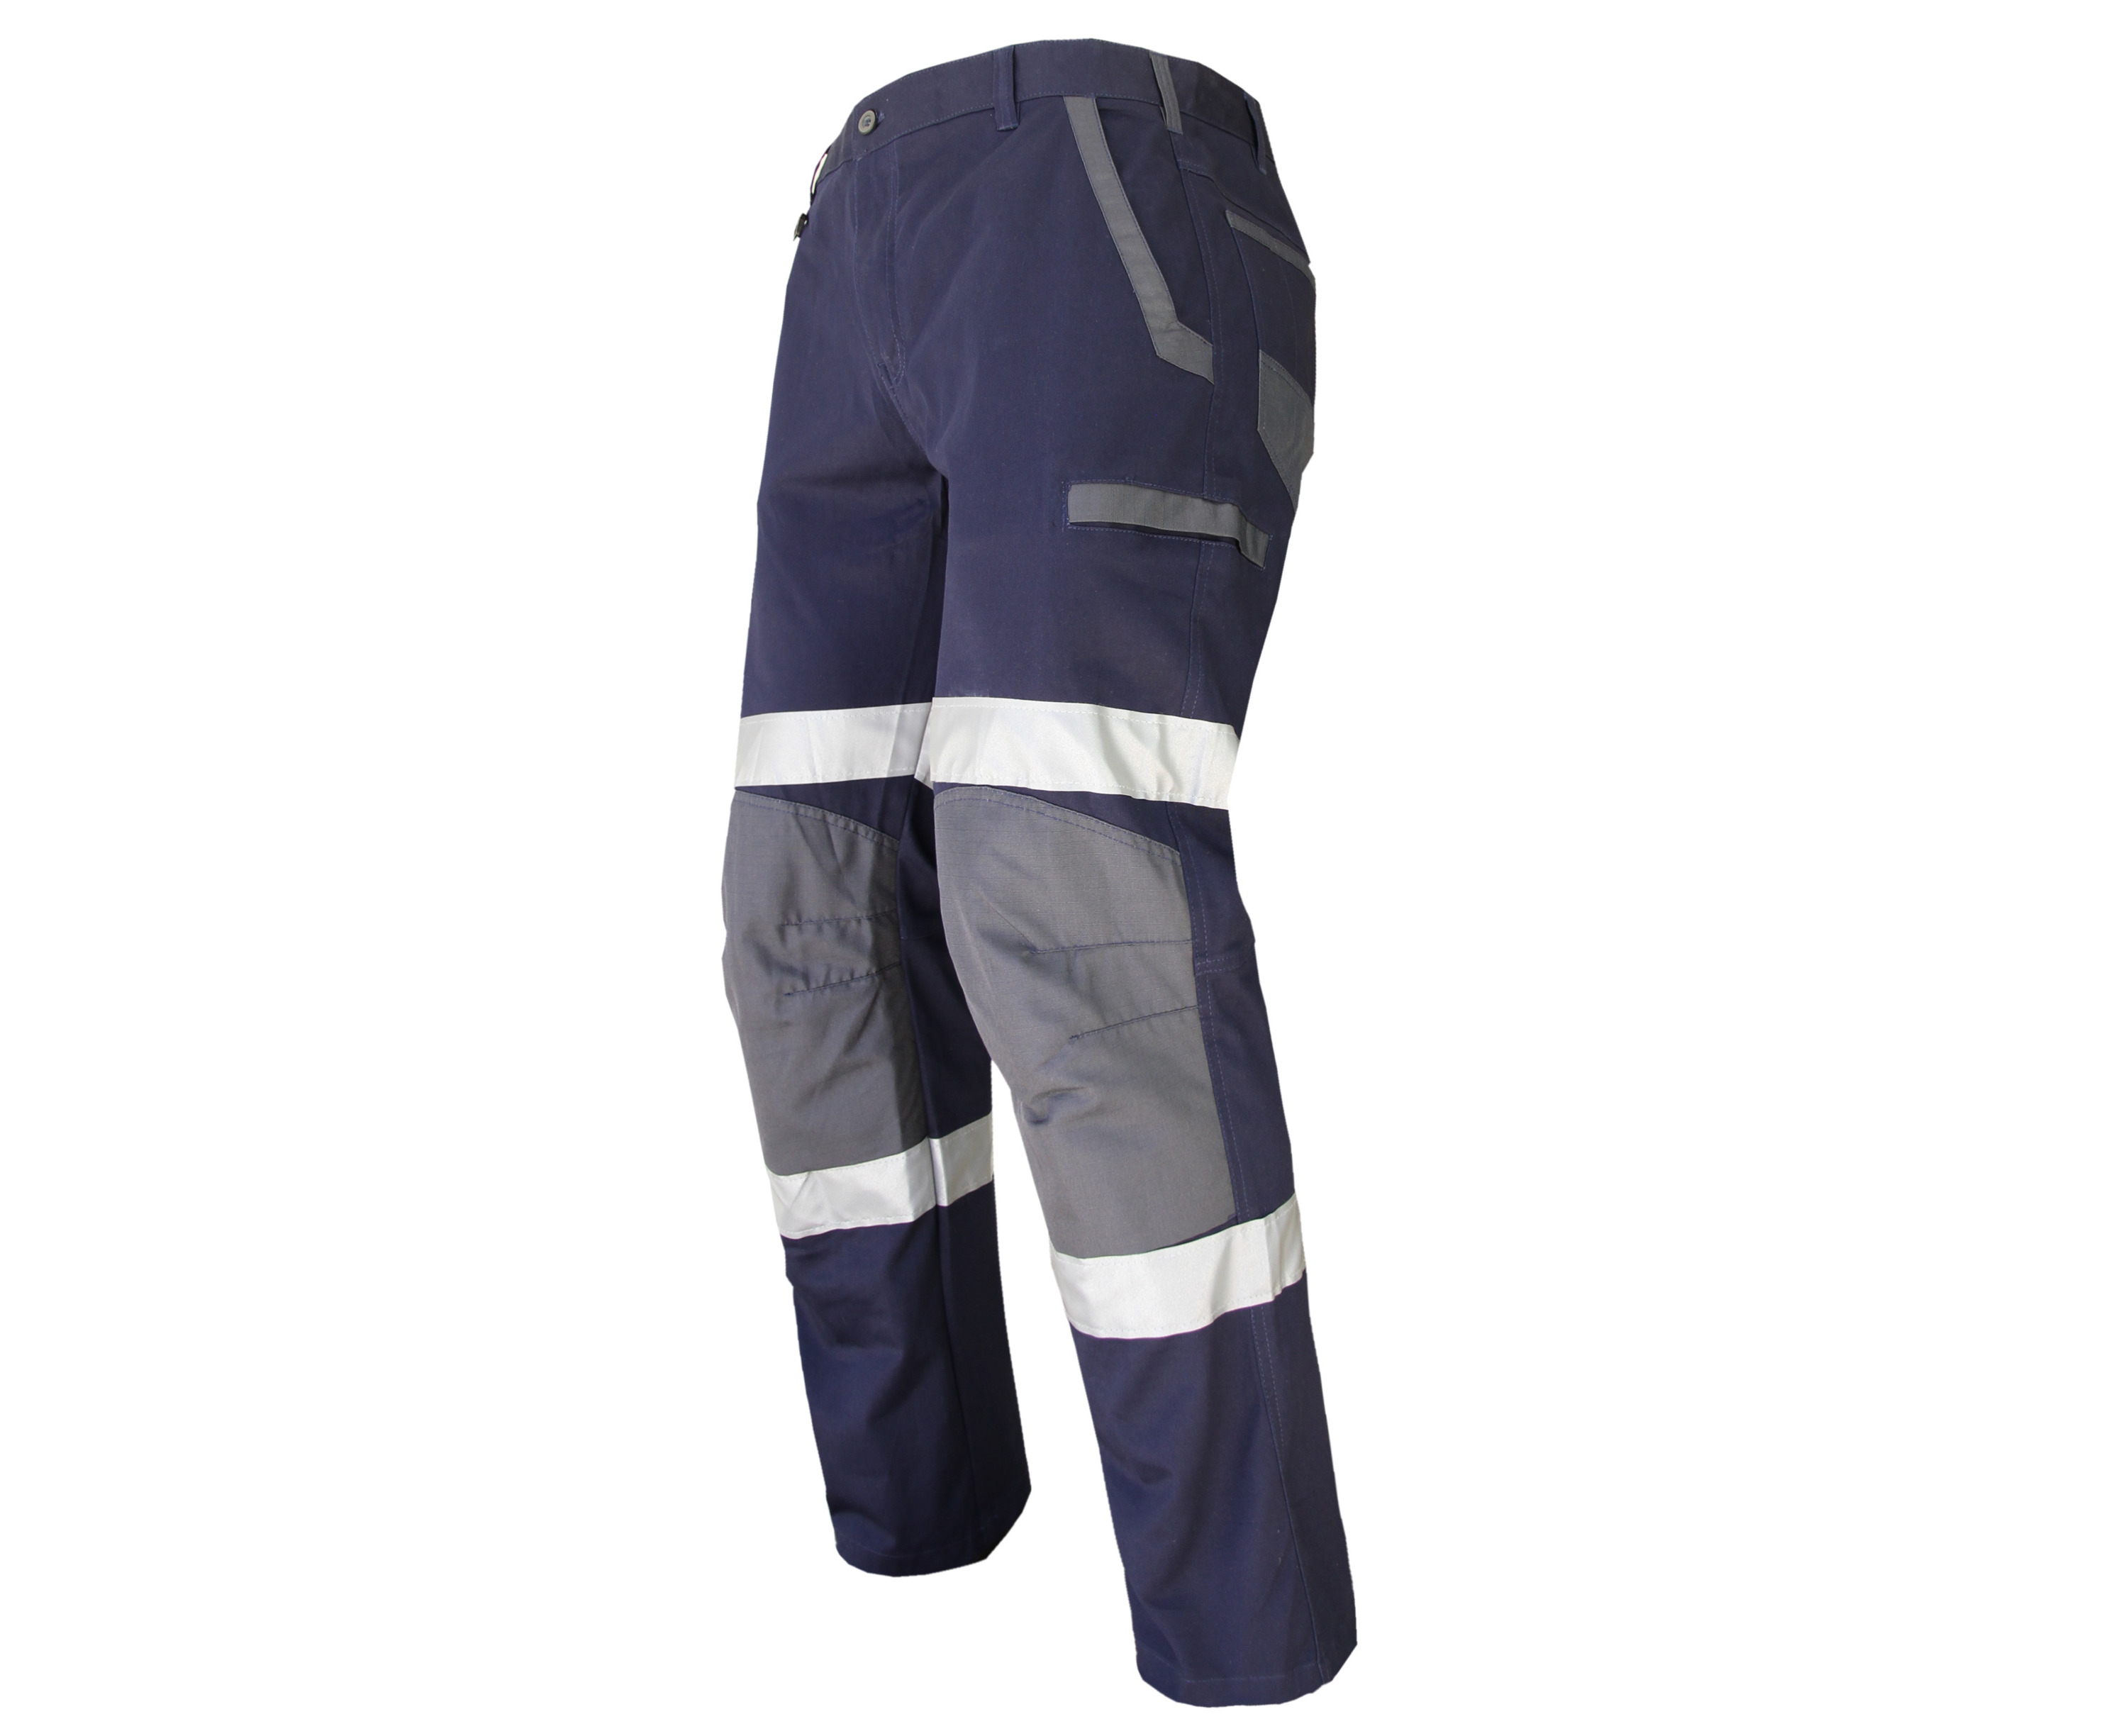 REFLECTIVE STRETCH WORK PANTS - WP-3T